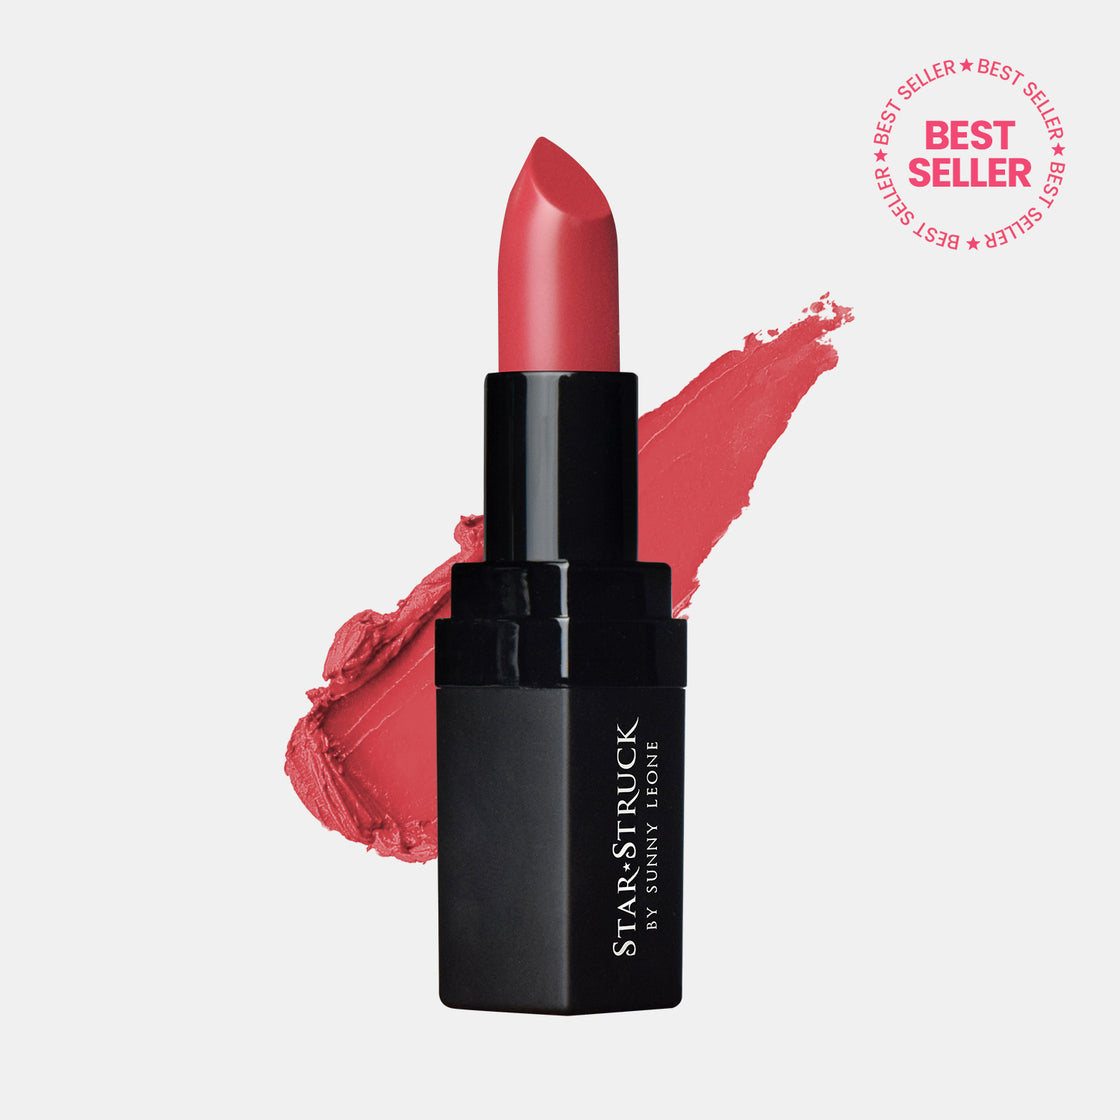 Coralicious - Luxe Matte Lipstick, Coral Pink | 4.2gms